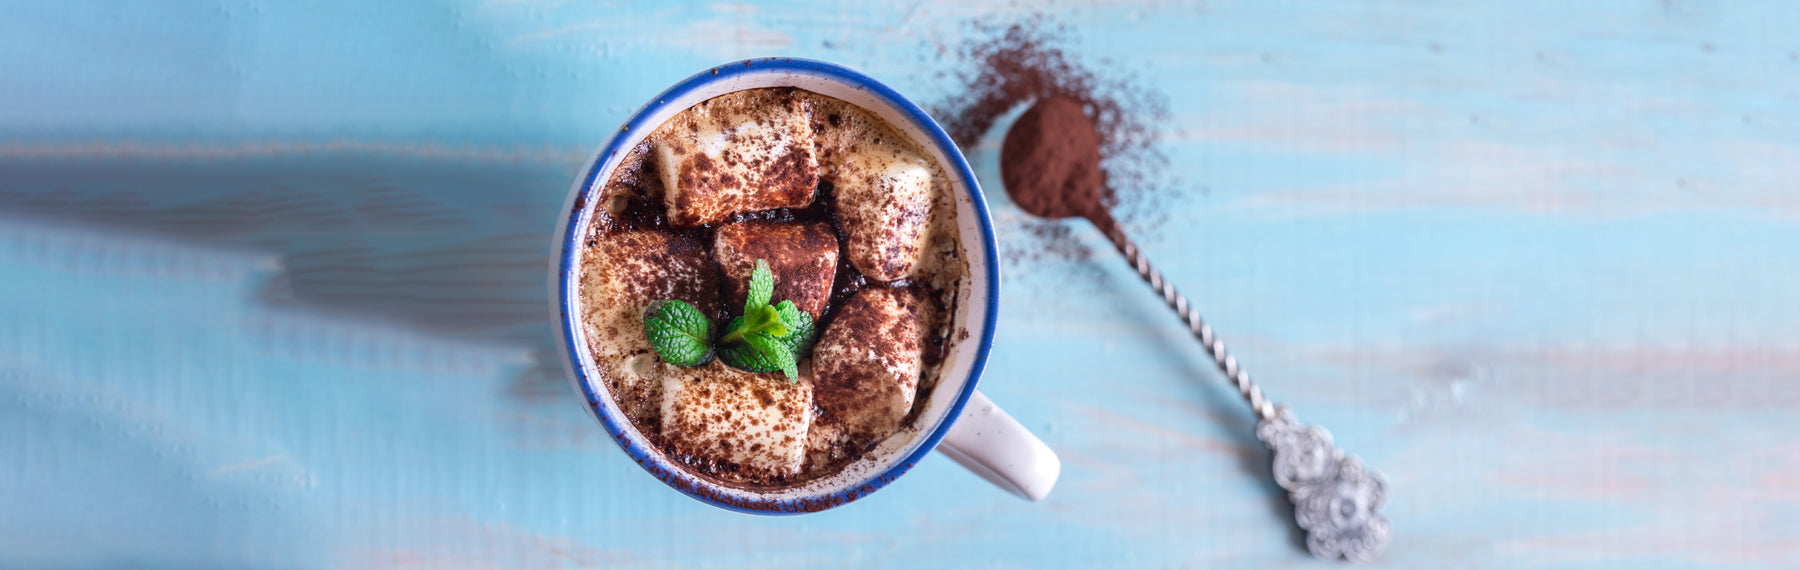 Cocoa Powder- What is it, How to use it, and Why it is Healthy? - Sorichorganics